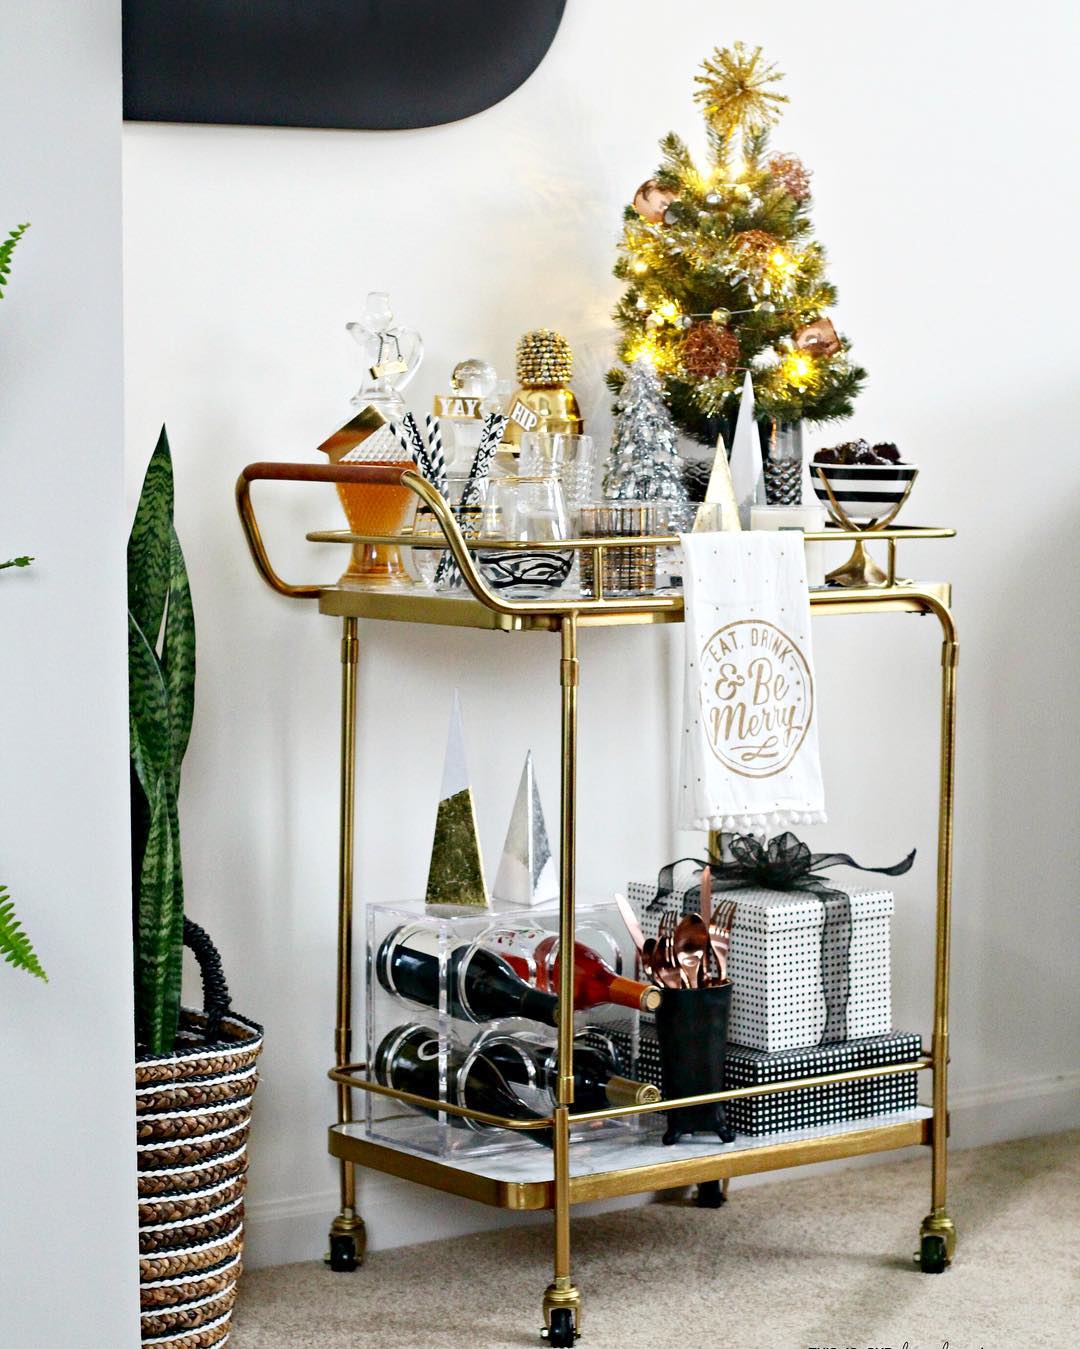 A Merry and Metallic Christmas Home | 12 Days of Holiday Homes Tour 2016: This is our Bliss Christmas Living Room | Holiday Bar Cart styling || www.thisisourbliss.com